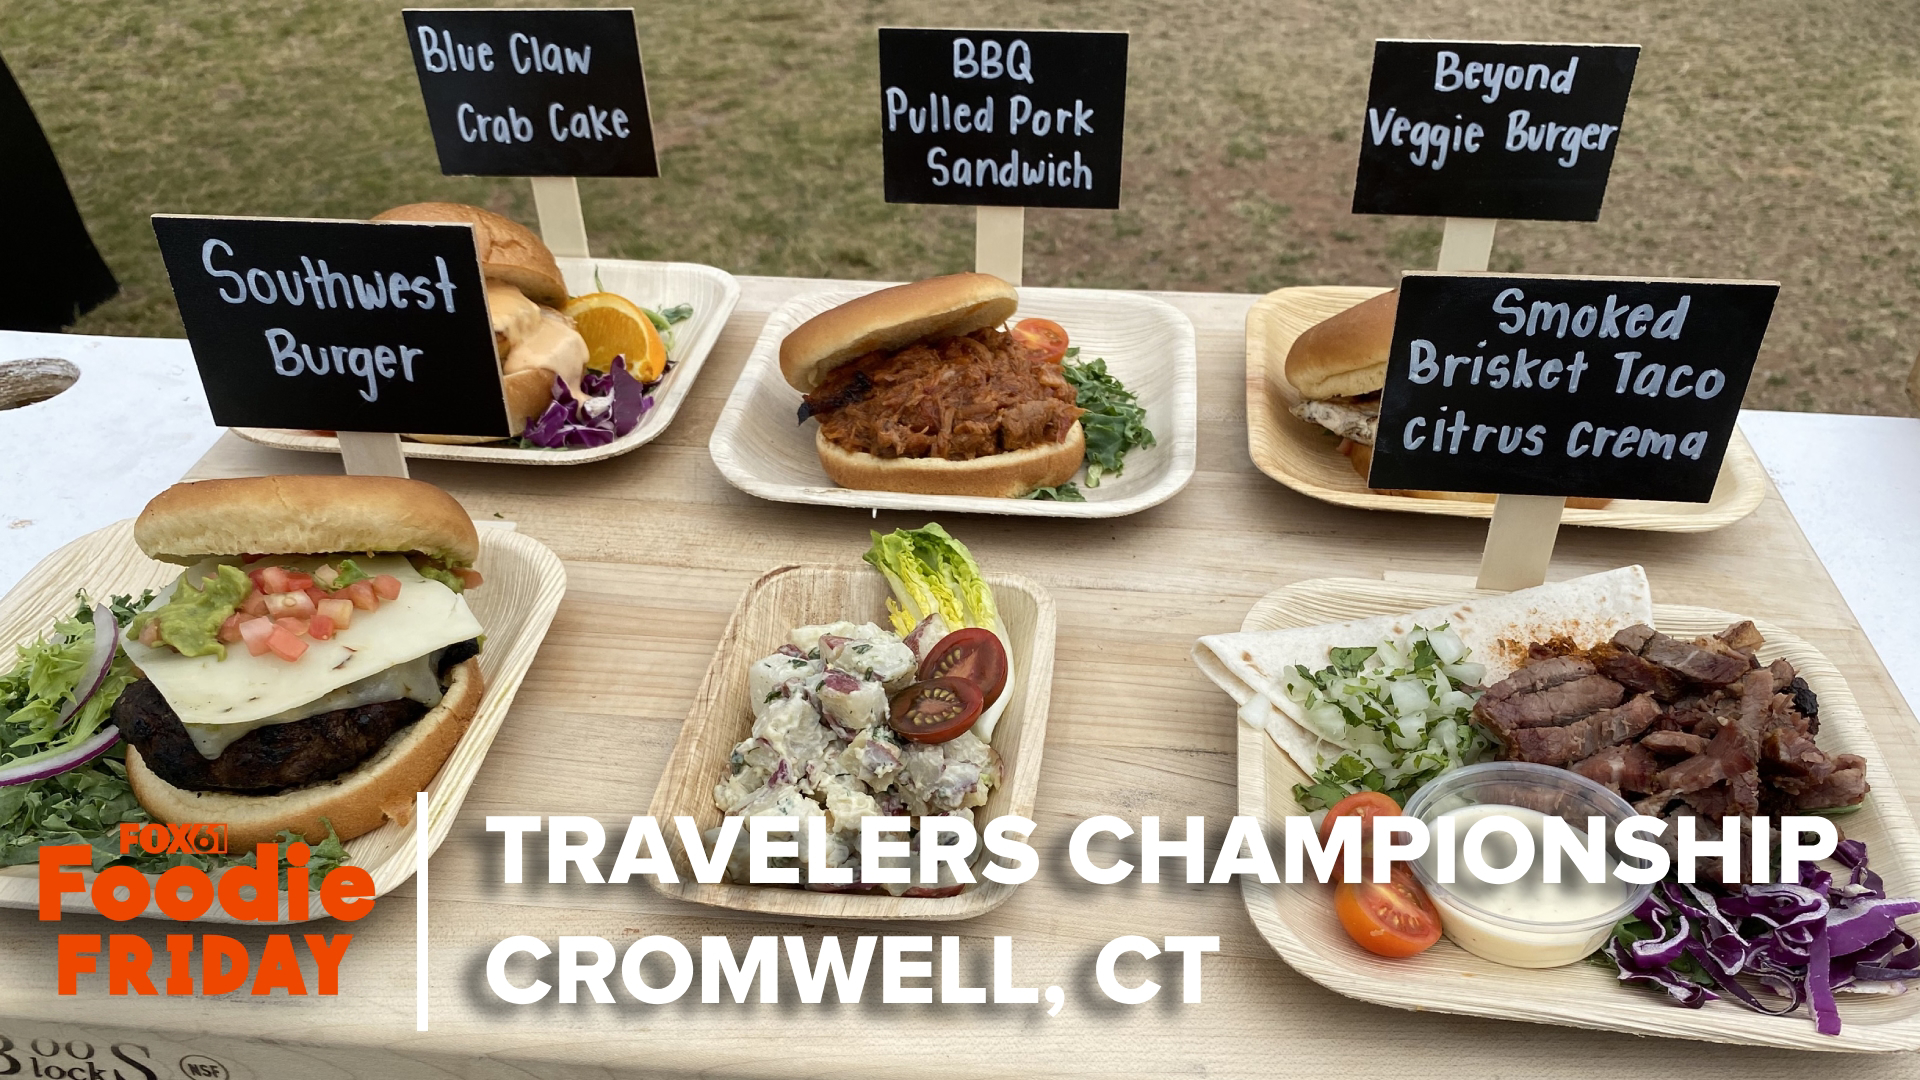 In a special edition of Foodie Friday, Lindsey Kane takes you on a gastronomy tour of the Travelers Championship.